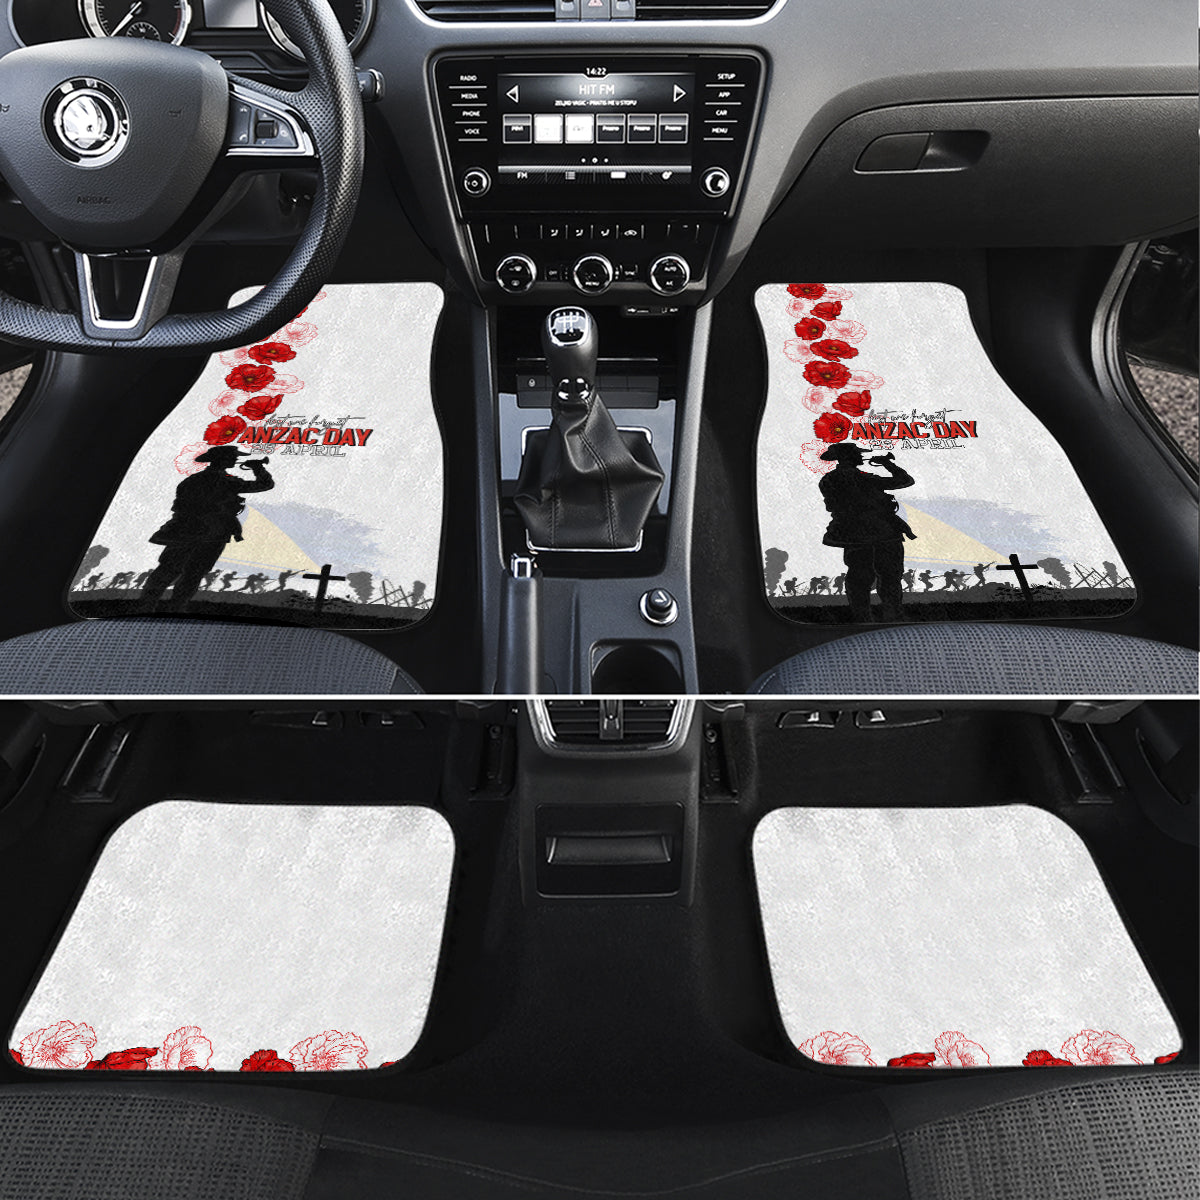 Tokelau ANZAC Day Car Mats Lest We Forget Red Poppy Flowers and Soldier LT03 Set 4pcs White - Polynesian Pride